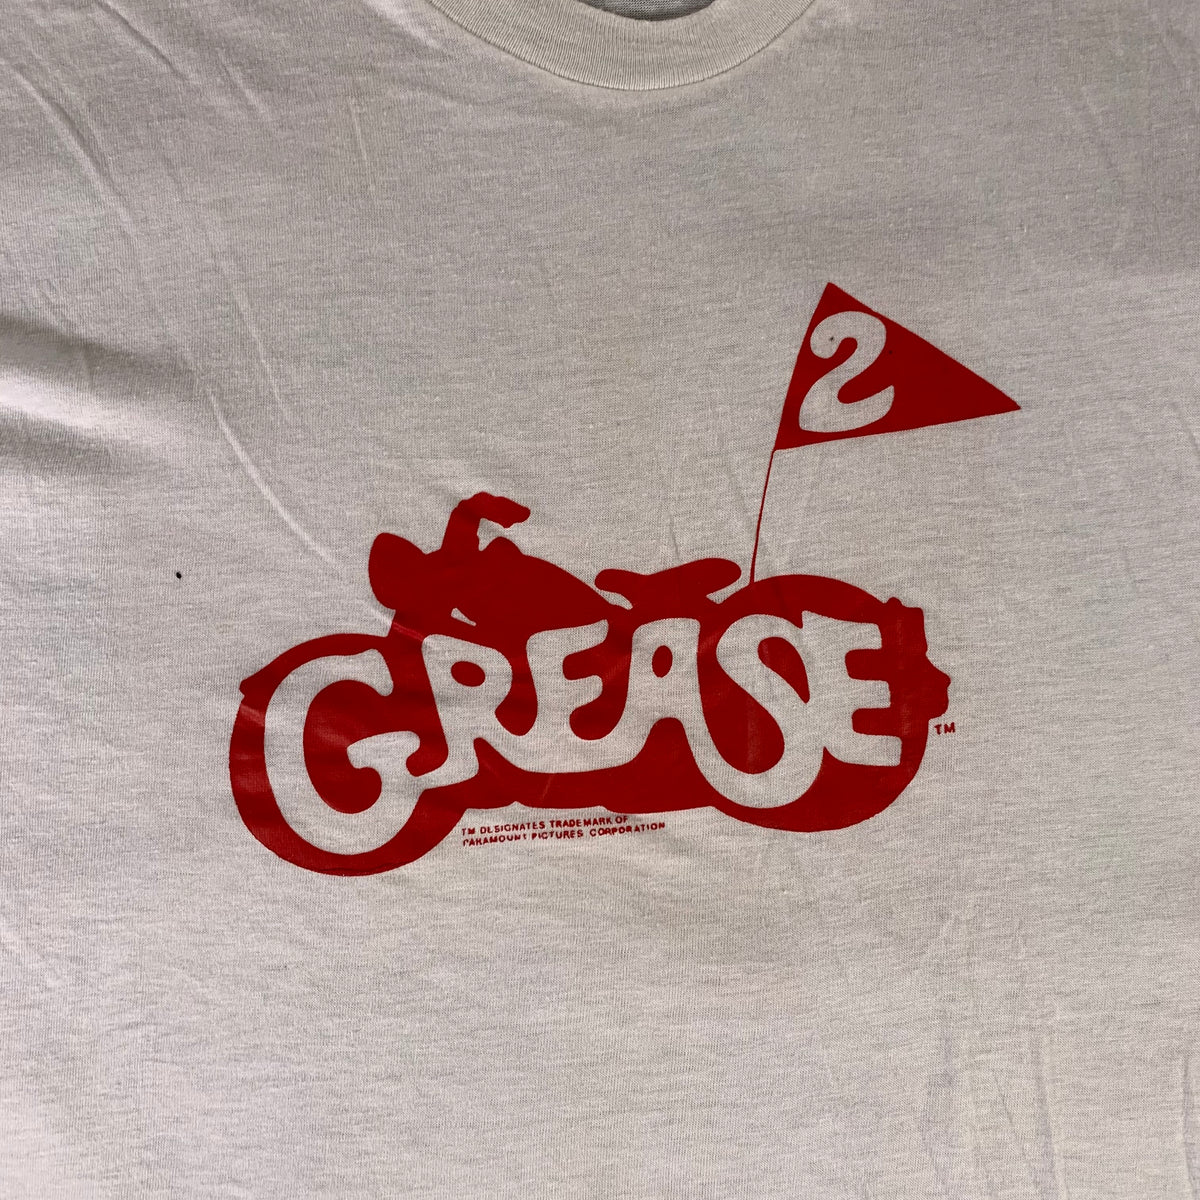 Vintage Grease 2 &quot;Paramount Pictures&quot; Promotional T-Shirt